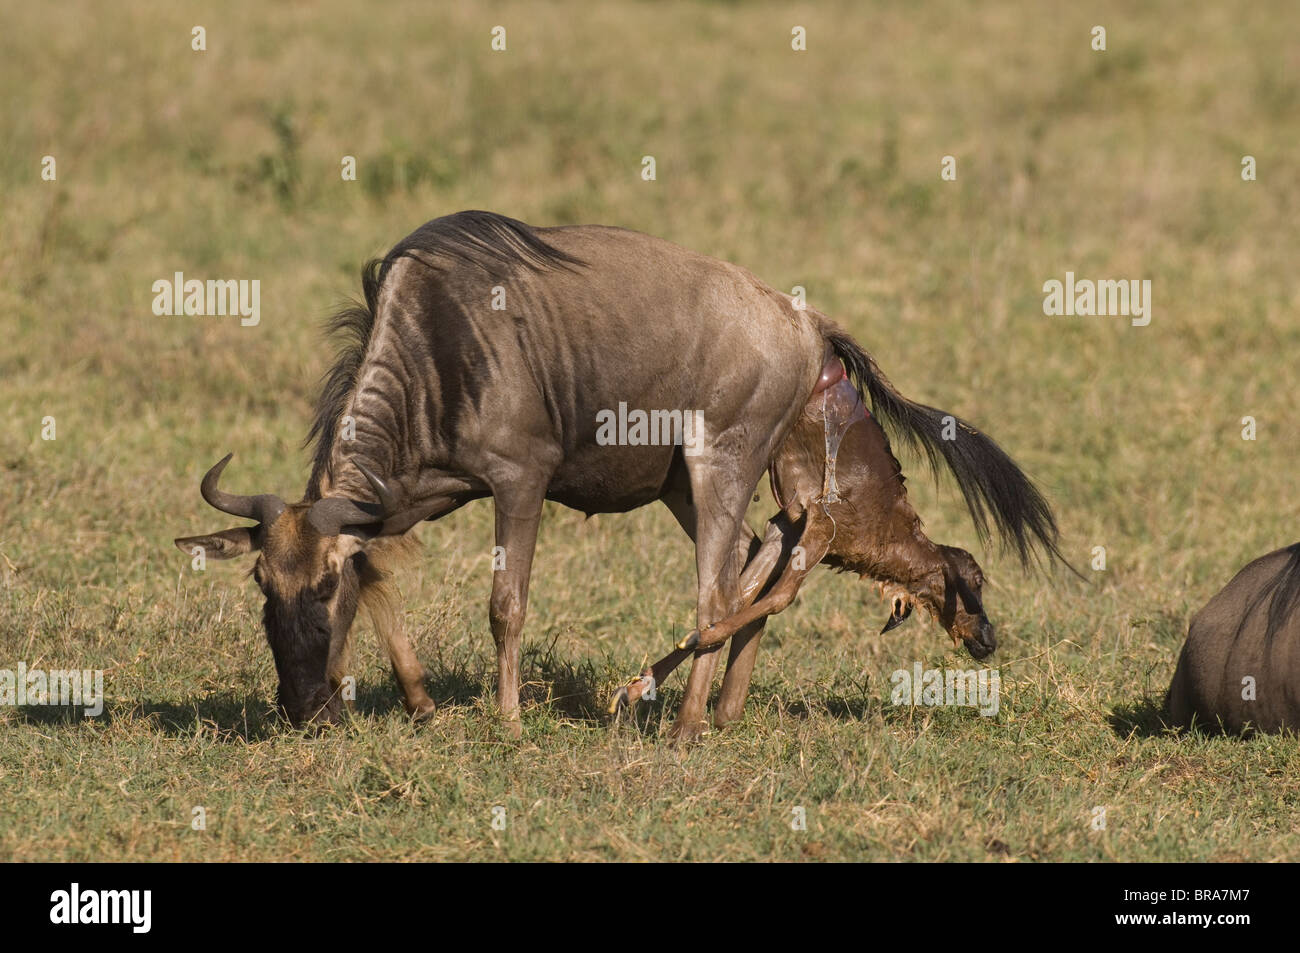 WILDEBEEST GIVING BIRTH TO YOUNG NGORONGORO CRATER TANZANIA AFRICA Stock Photo